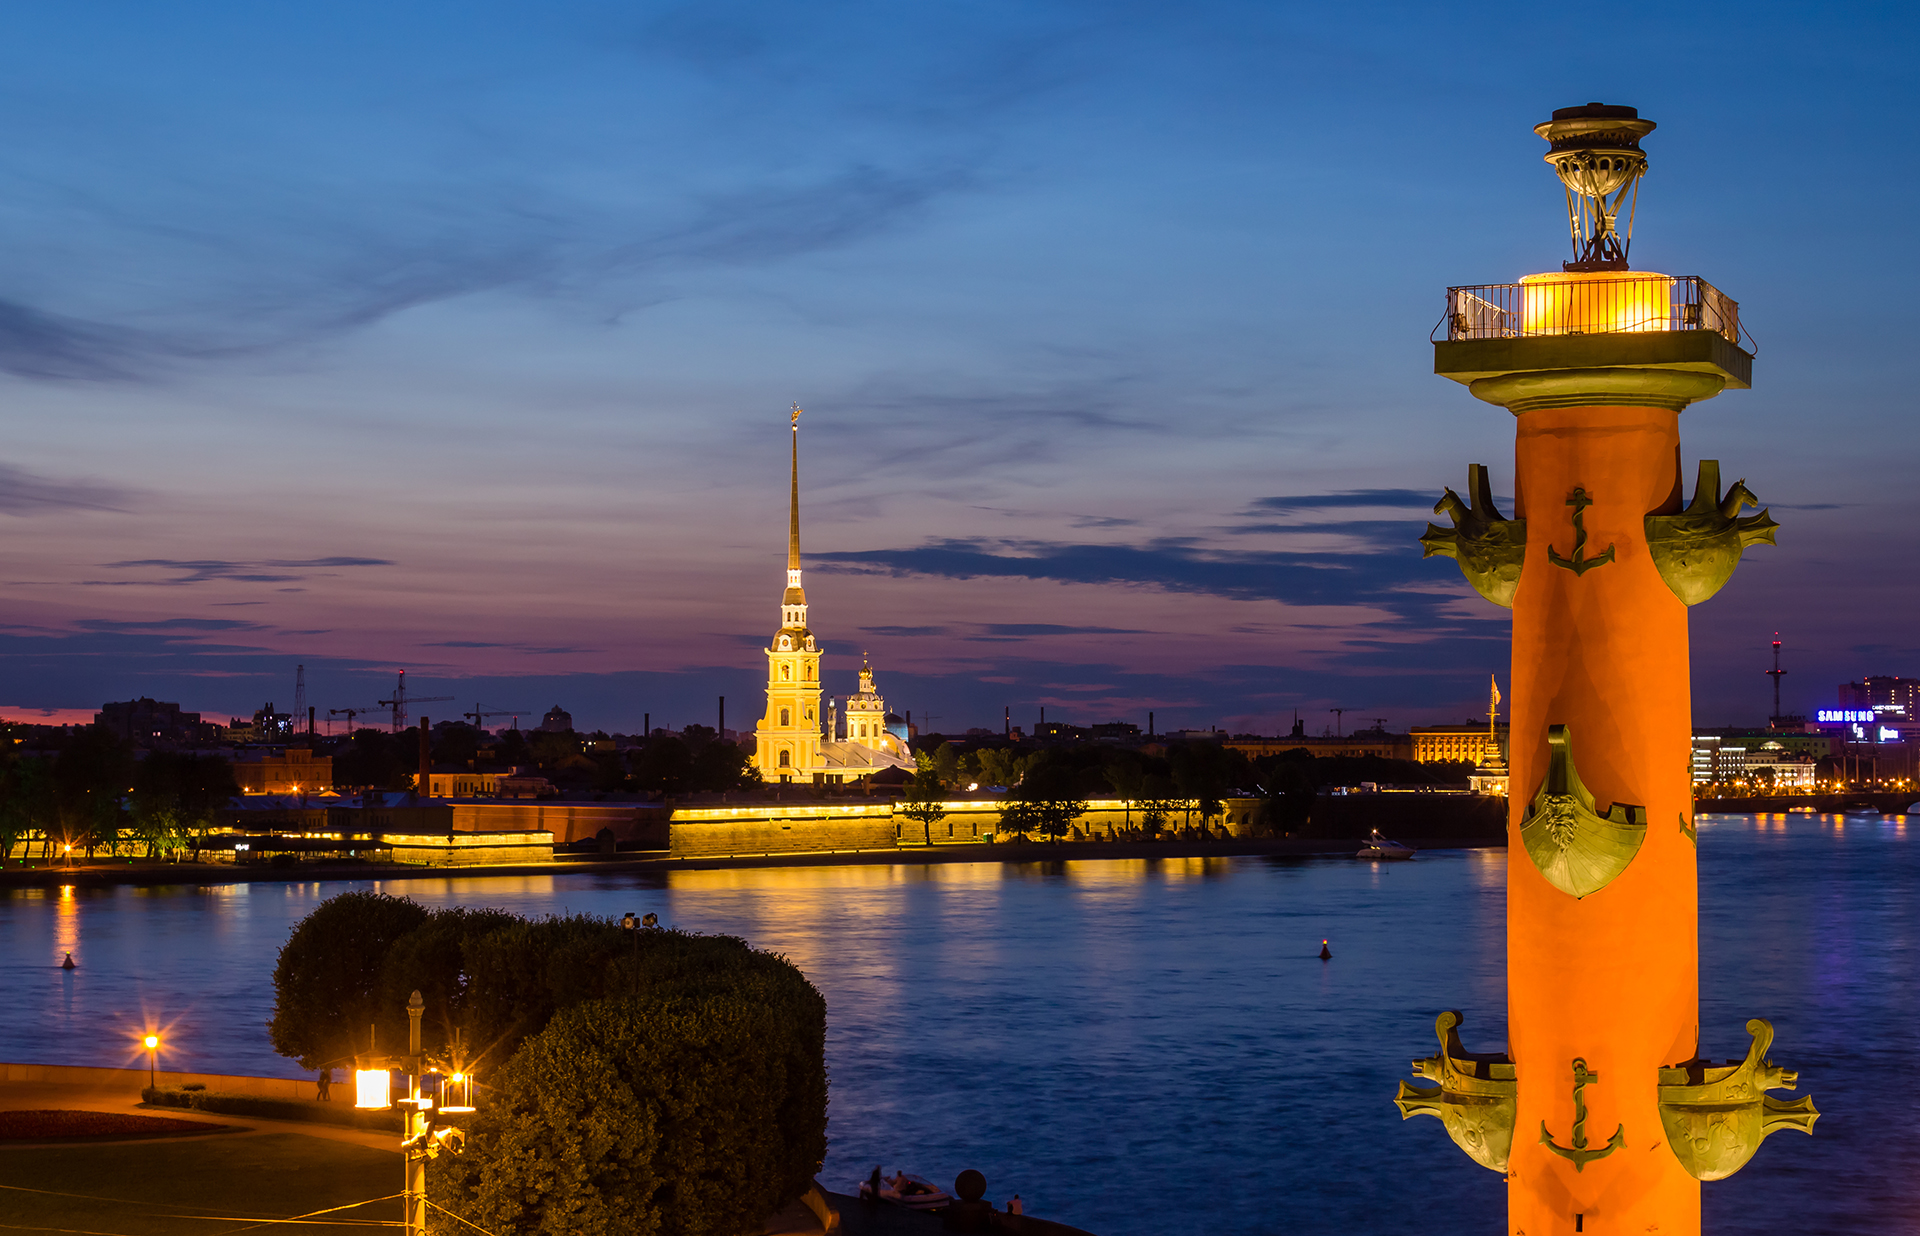 Water, rivers and canals: St. Petersburg is often called the Venice of the North, because it is situated on about 40 islands. Peter the Great, the founder of the city, forbade the building of bridges in the very beginning and wanted everyone to get around by boat.